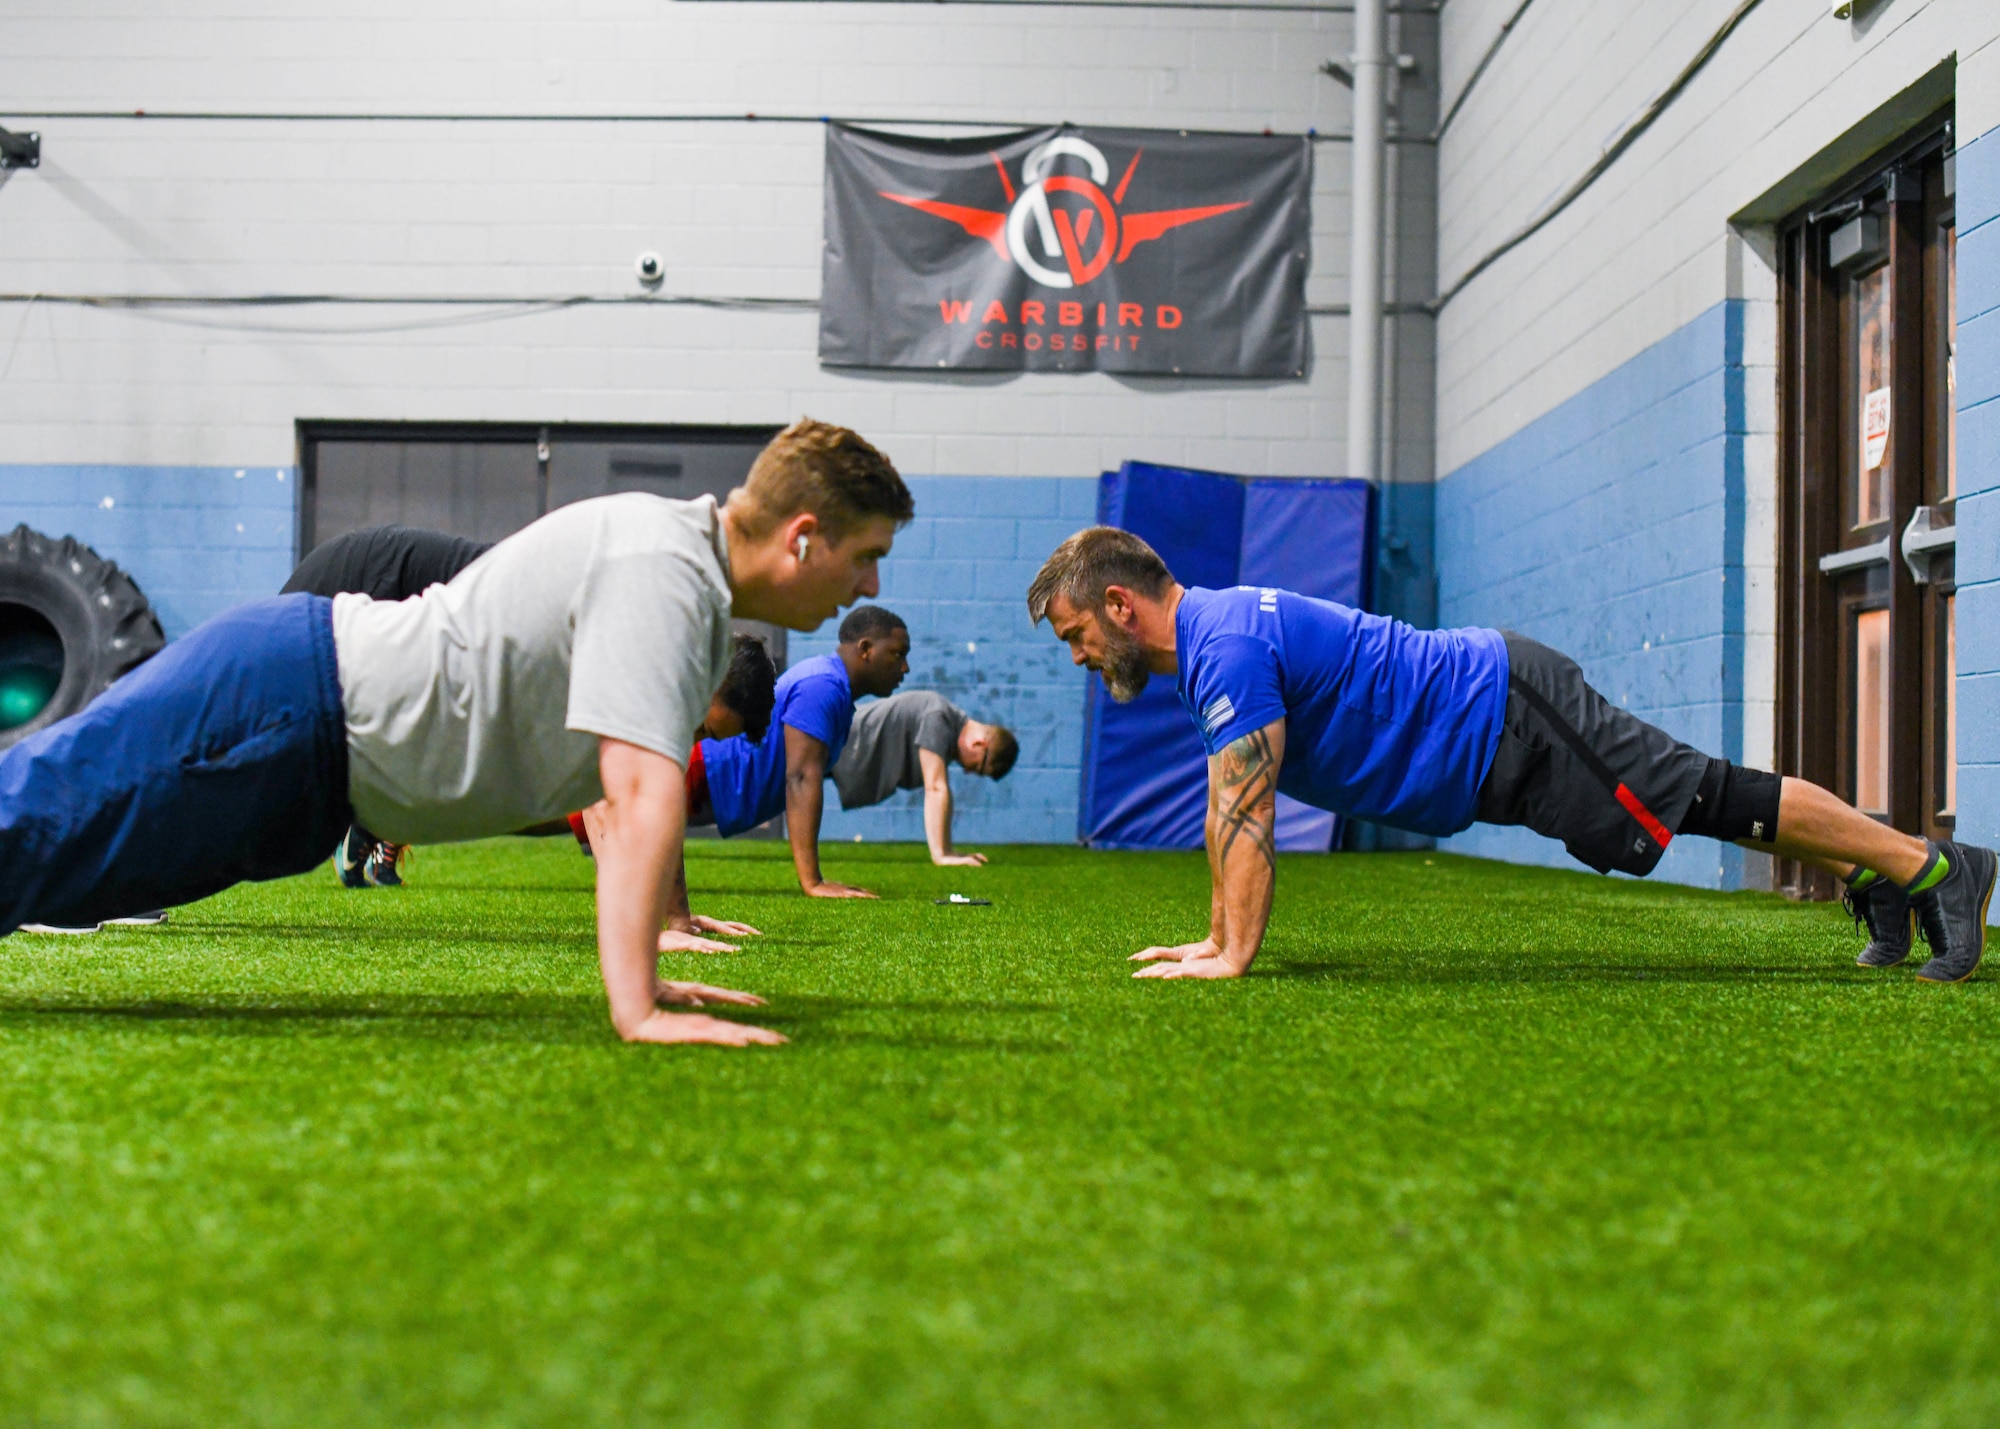 Brett Carbo, 75th Force Support Squadron training specialist, teaches proper push-up technique at the Hess Fitness Center on Hill Air Force Base.